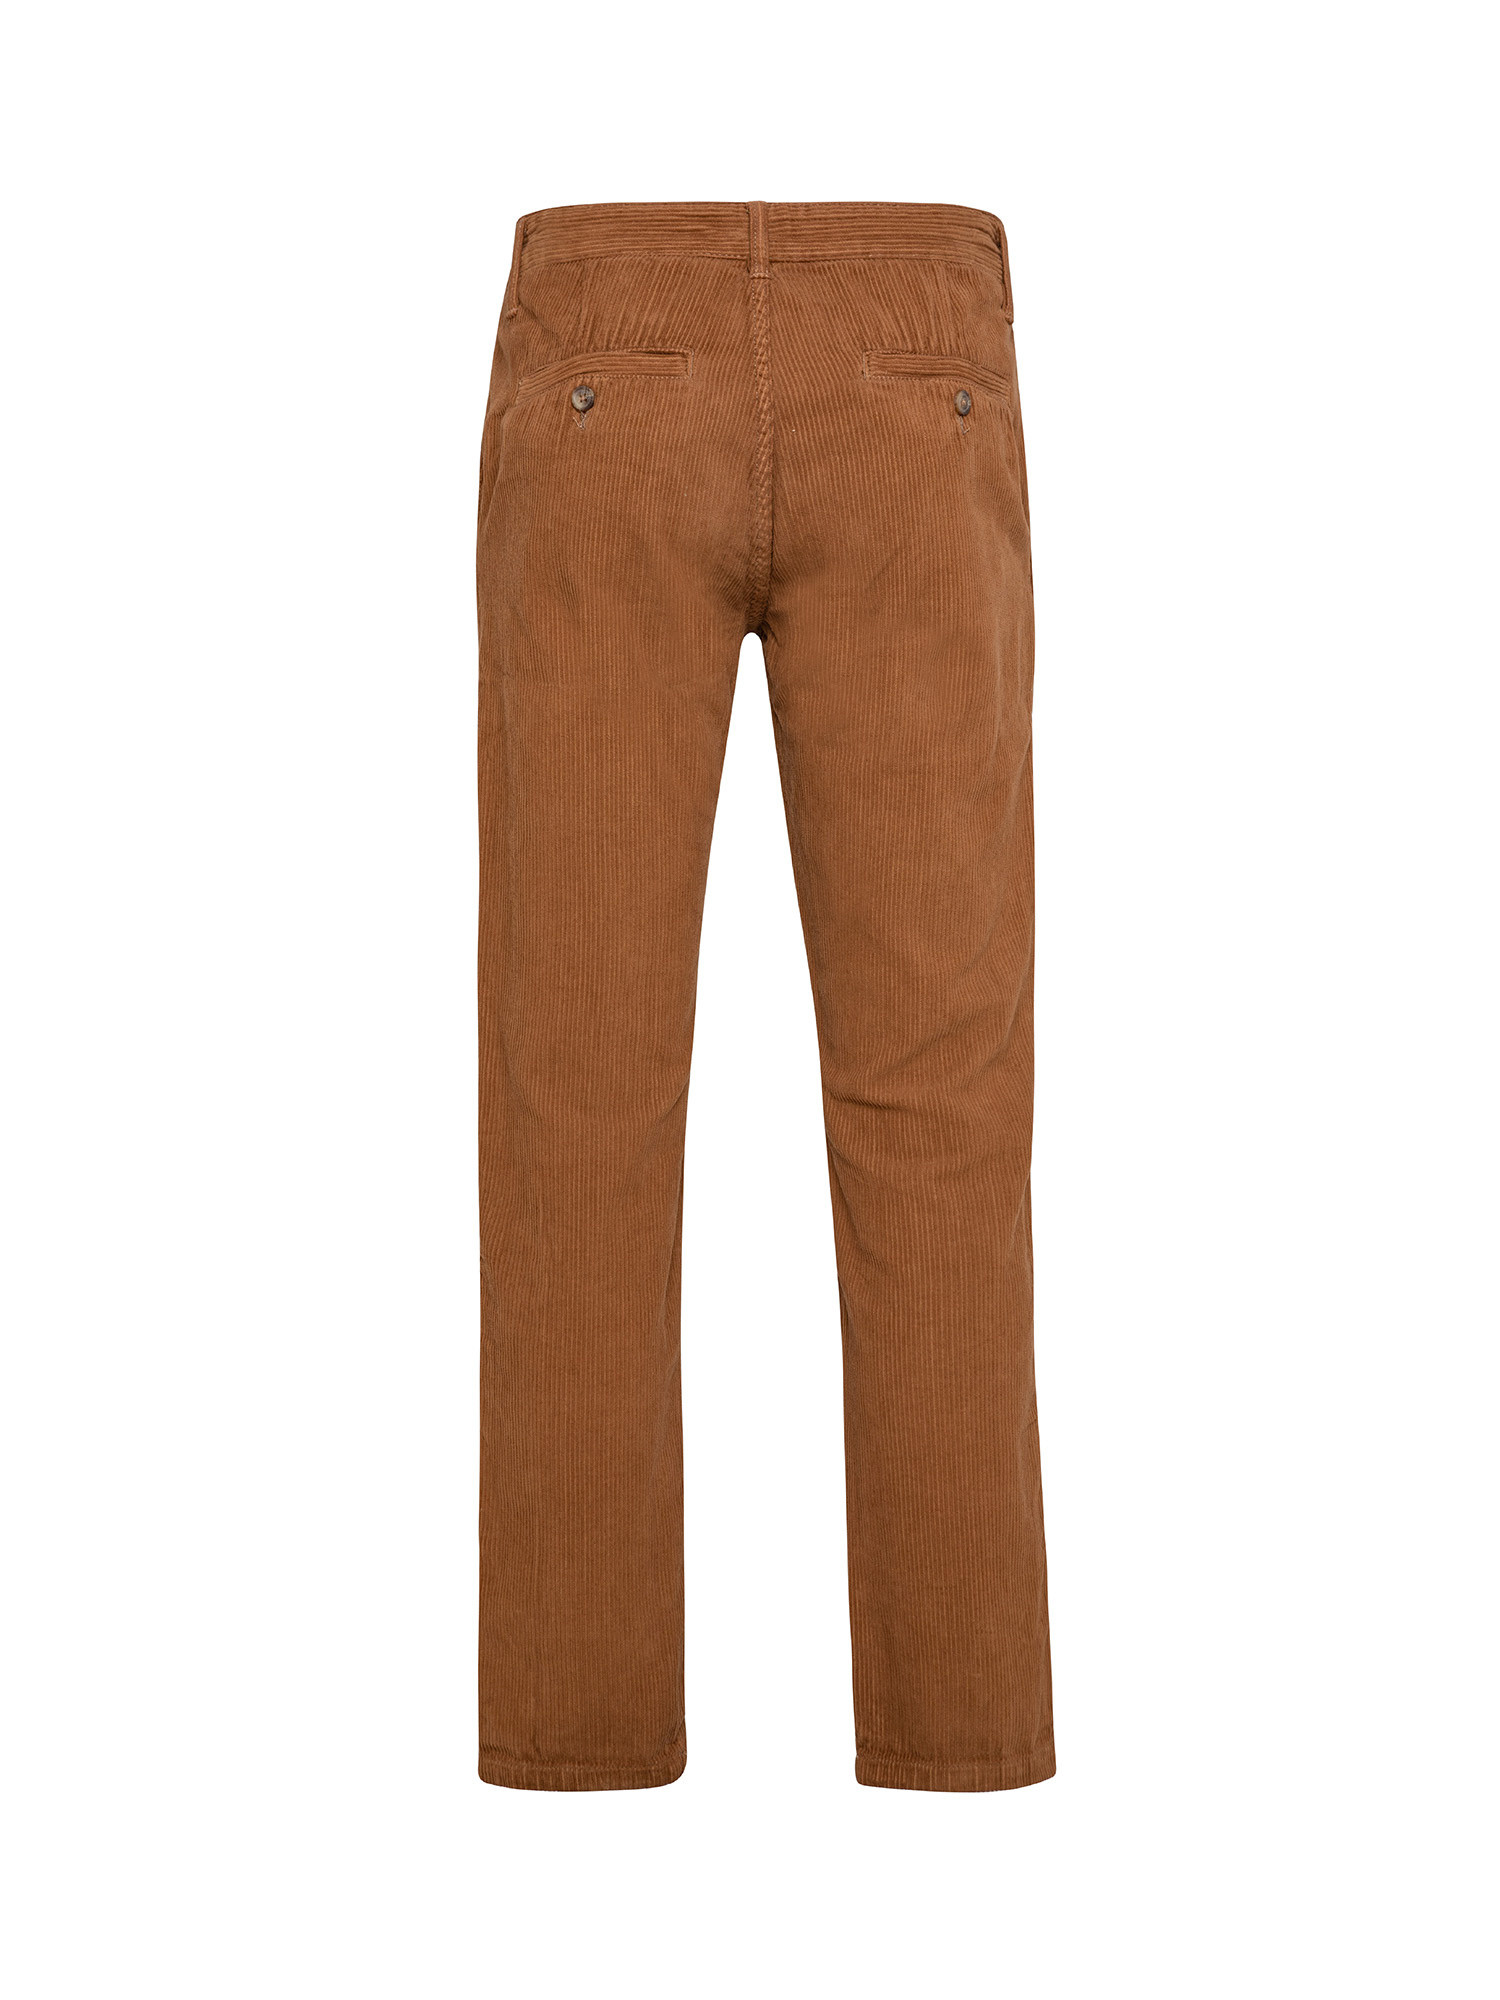 JCT - Velvet chino trousers, Brown, large image number 1